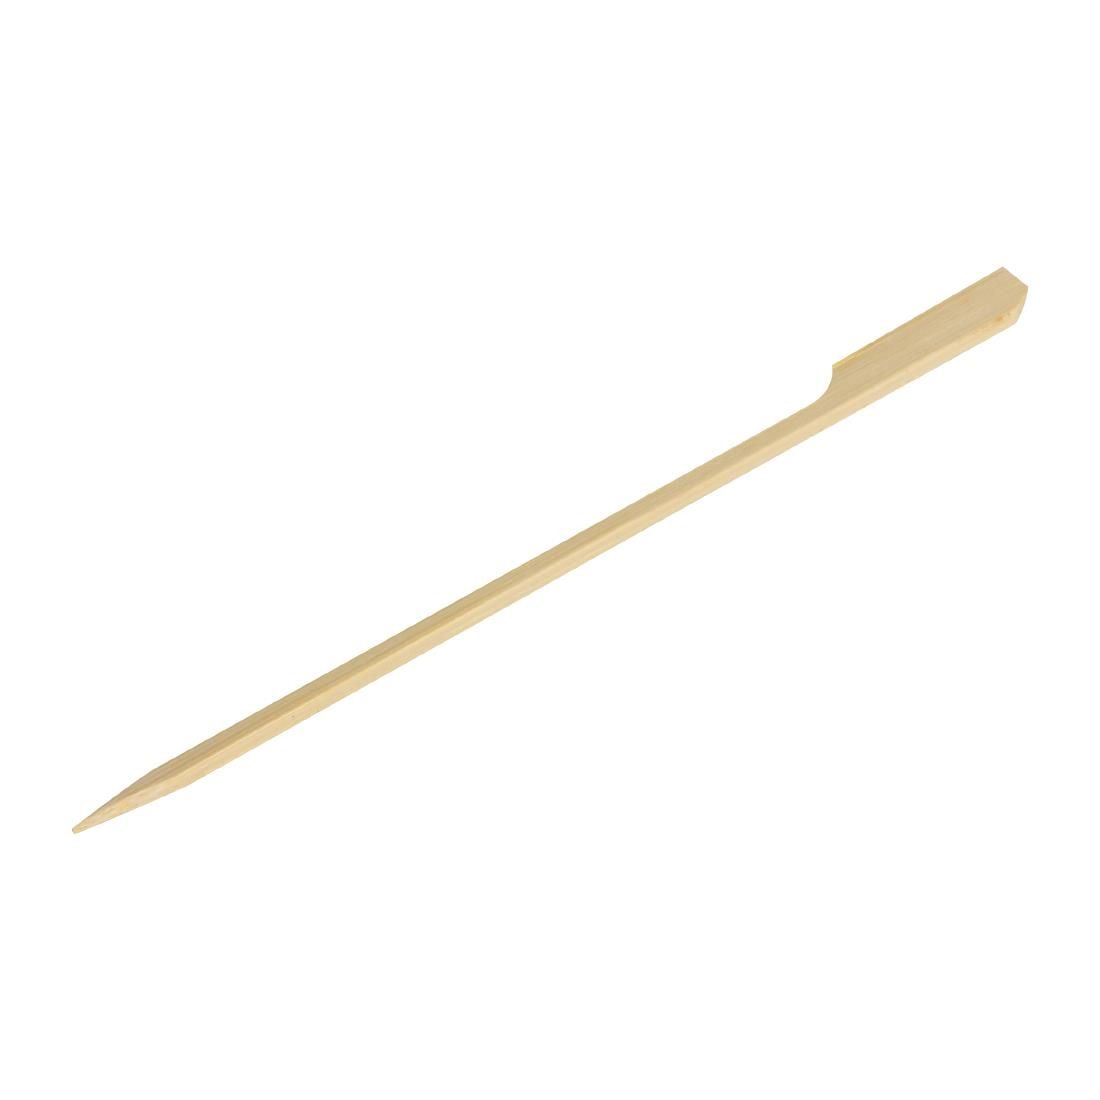 DK394 Fiesta Green Biodegradable Bamboo Paddle Skewers 150mm (Pack of 100) JD Catering Equipment Solutions Ltd